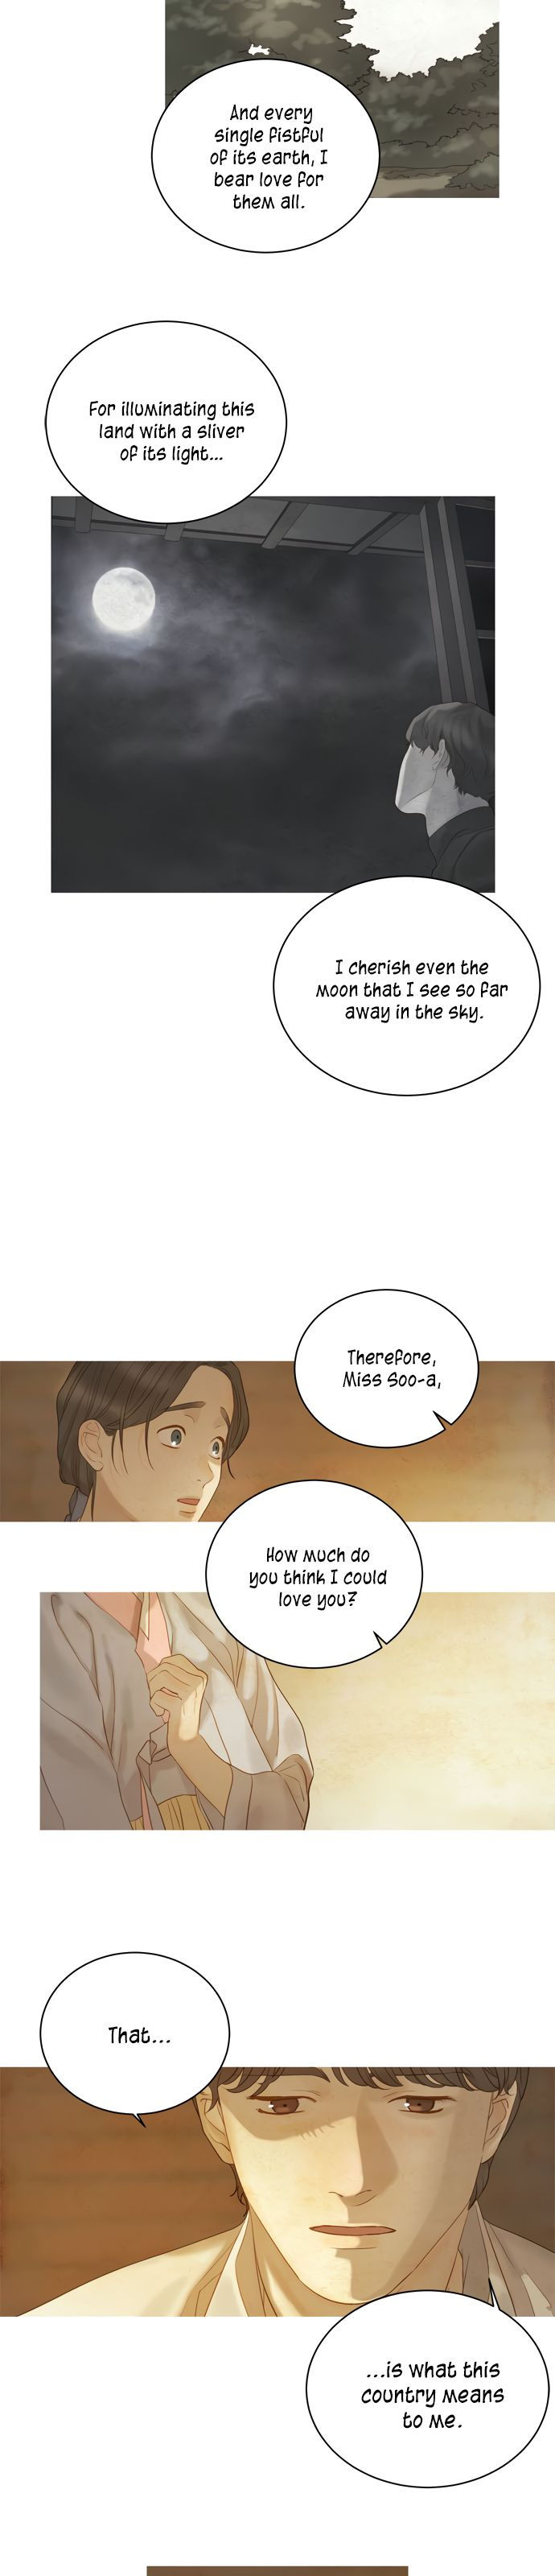 Gorae Byul - The Gyeongseong Mermaid - Chapter 23 Page 8